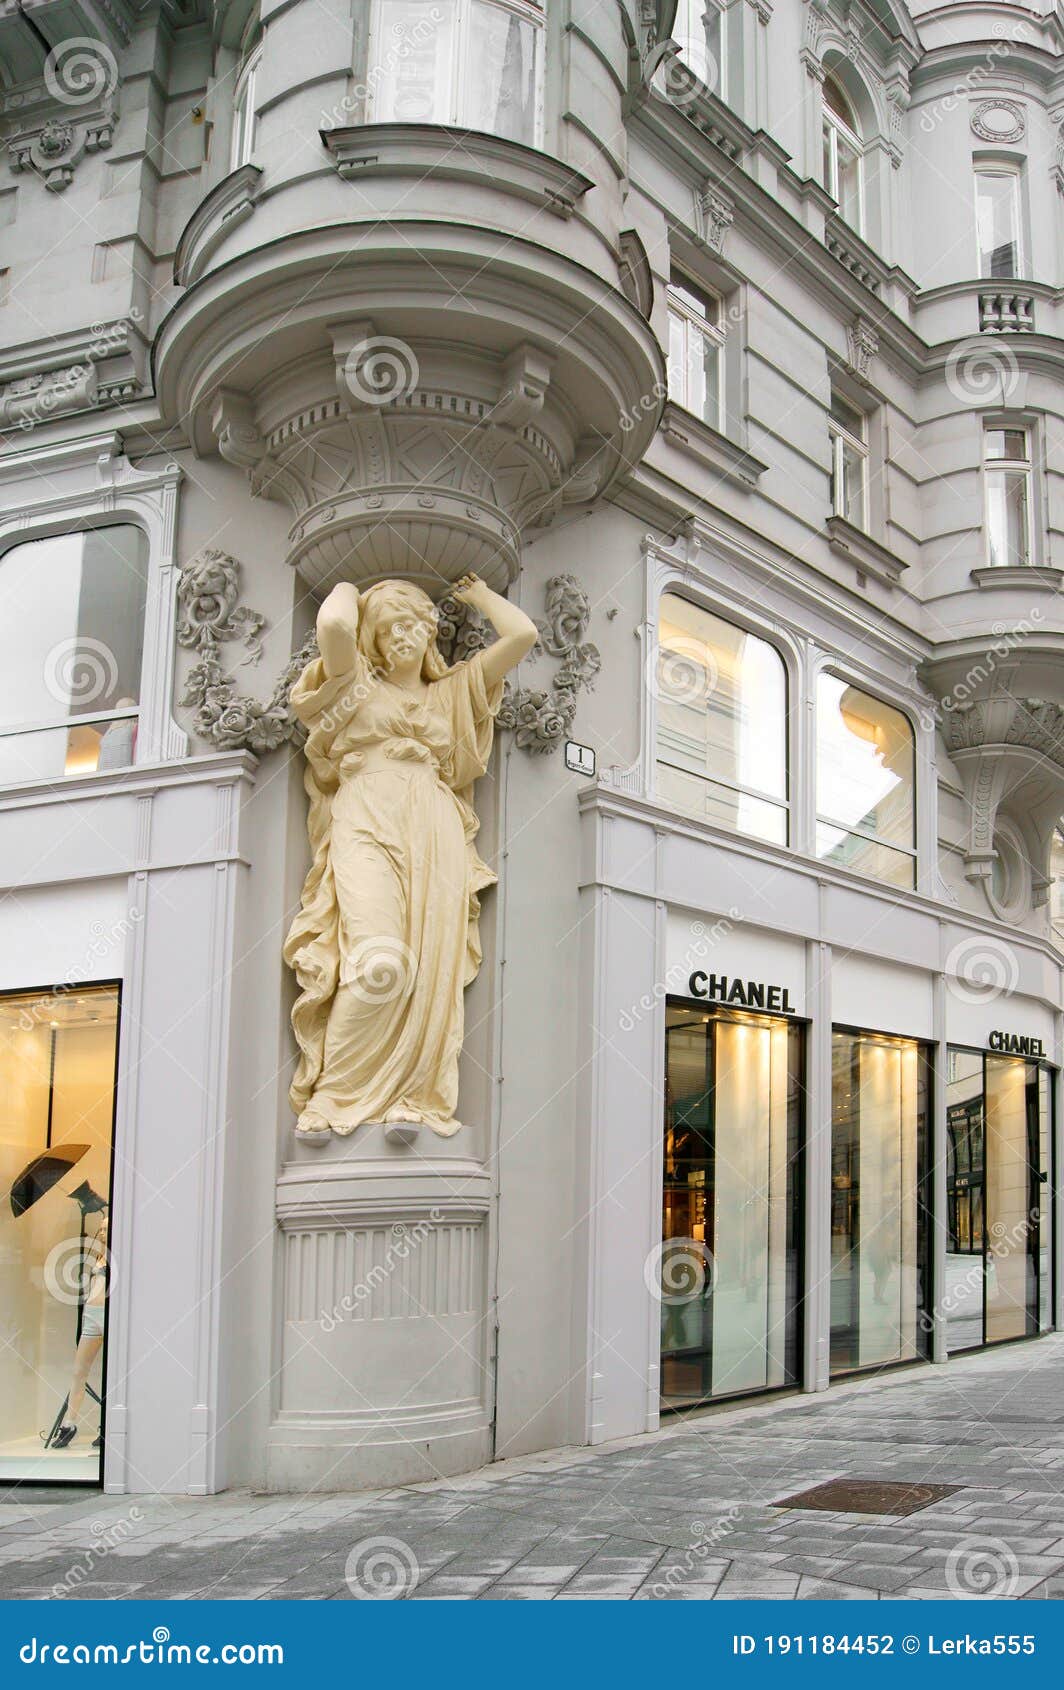 Famous Chanel Boutique on Tuchlauben Street of Vienna Editorial Photography - Image of historical, lifestyle: 191184452